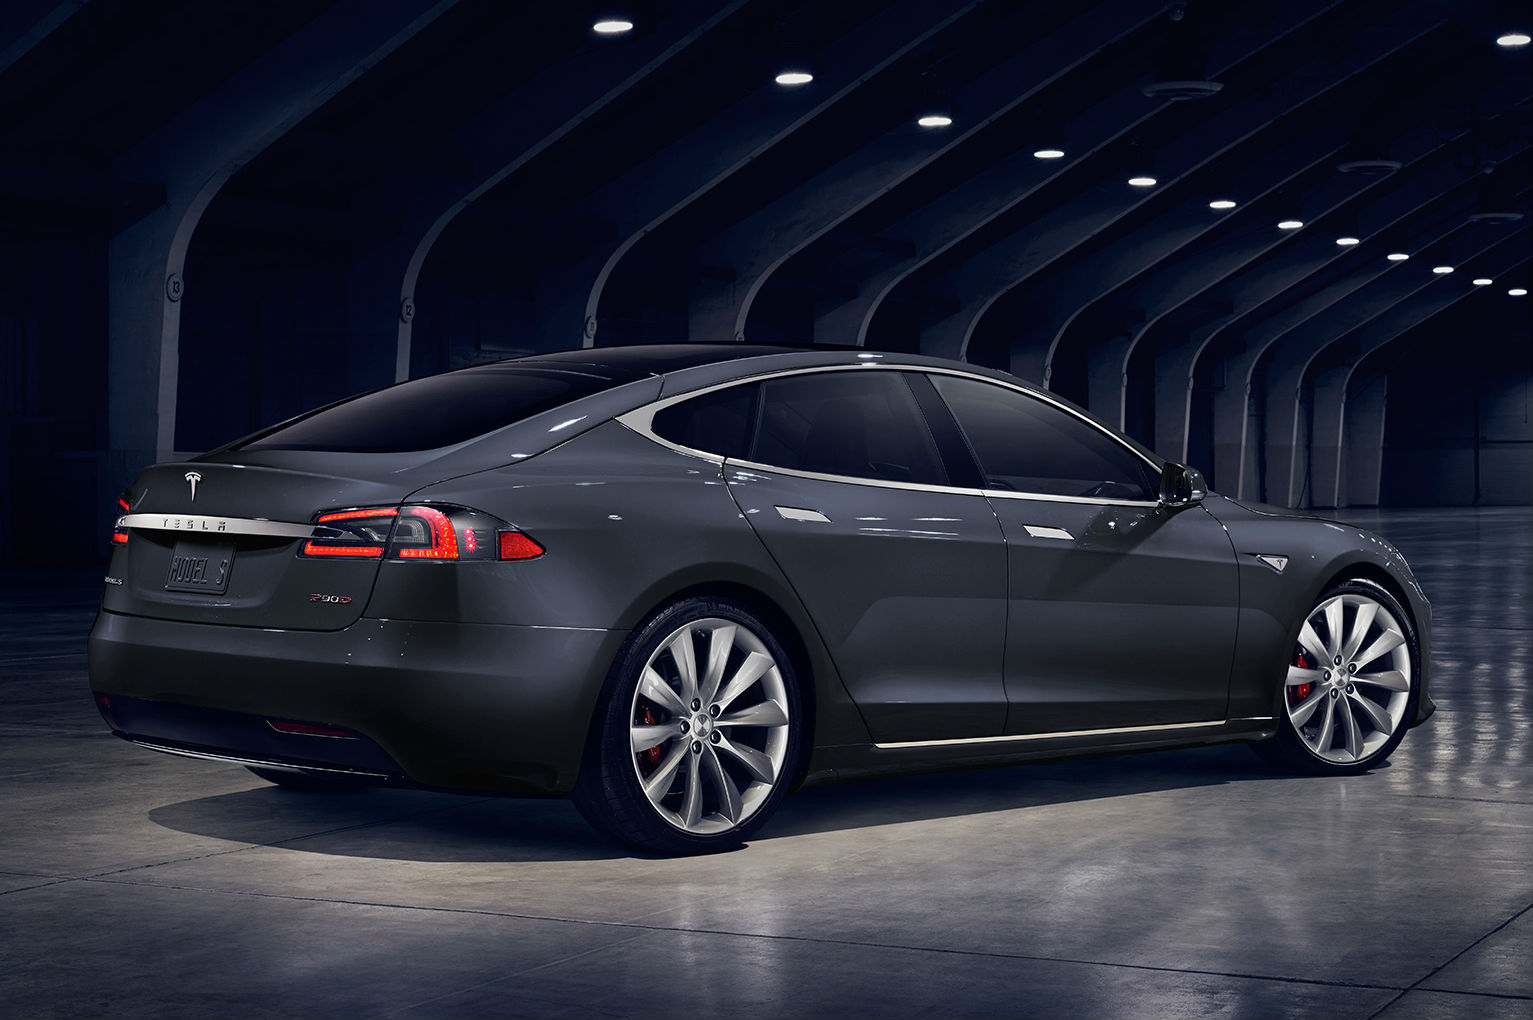 Facelifted Tesla Model S: less grille and more wood